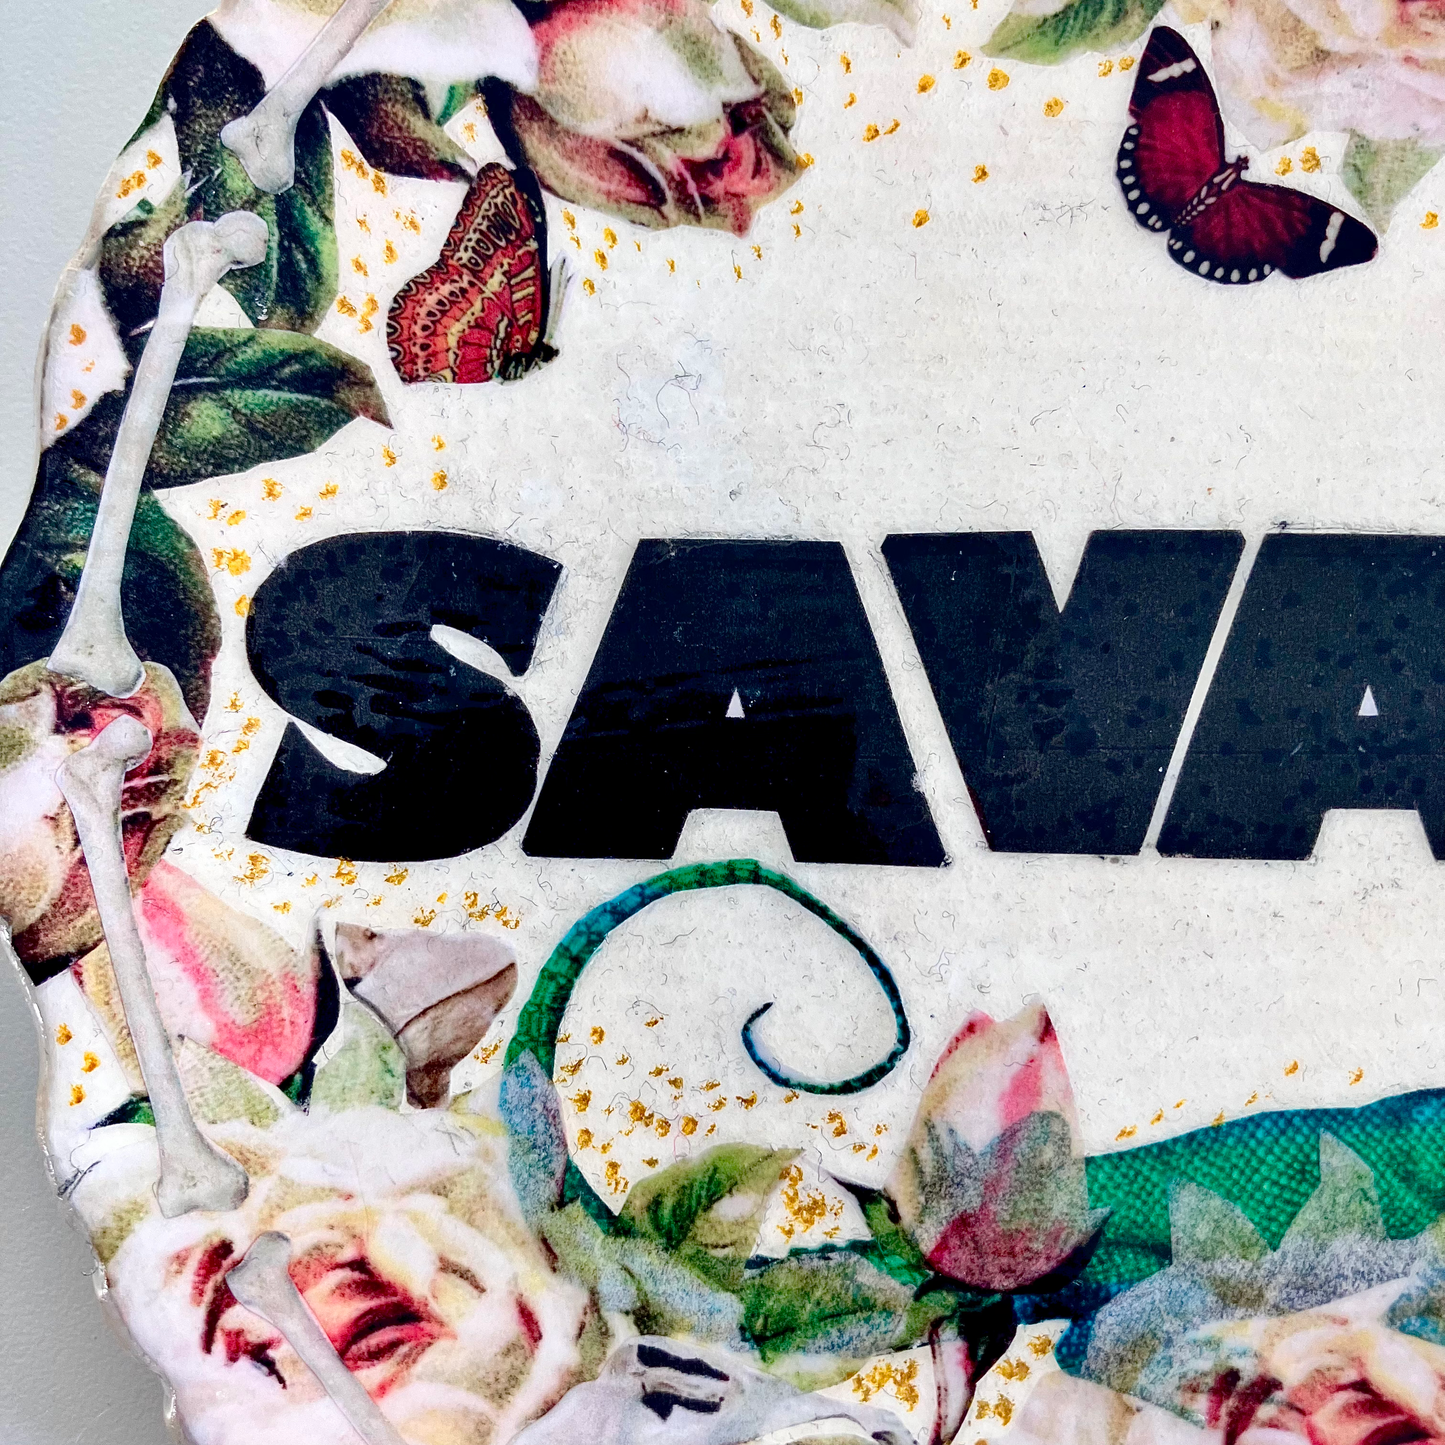 "Savage" Wall Plate by House of Frisson